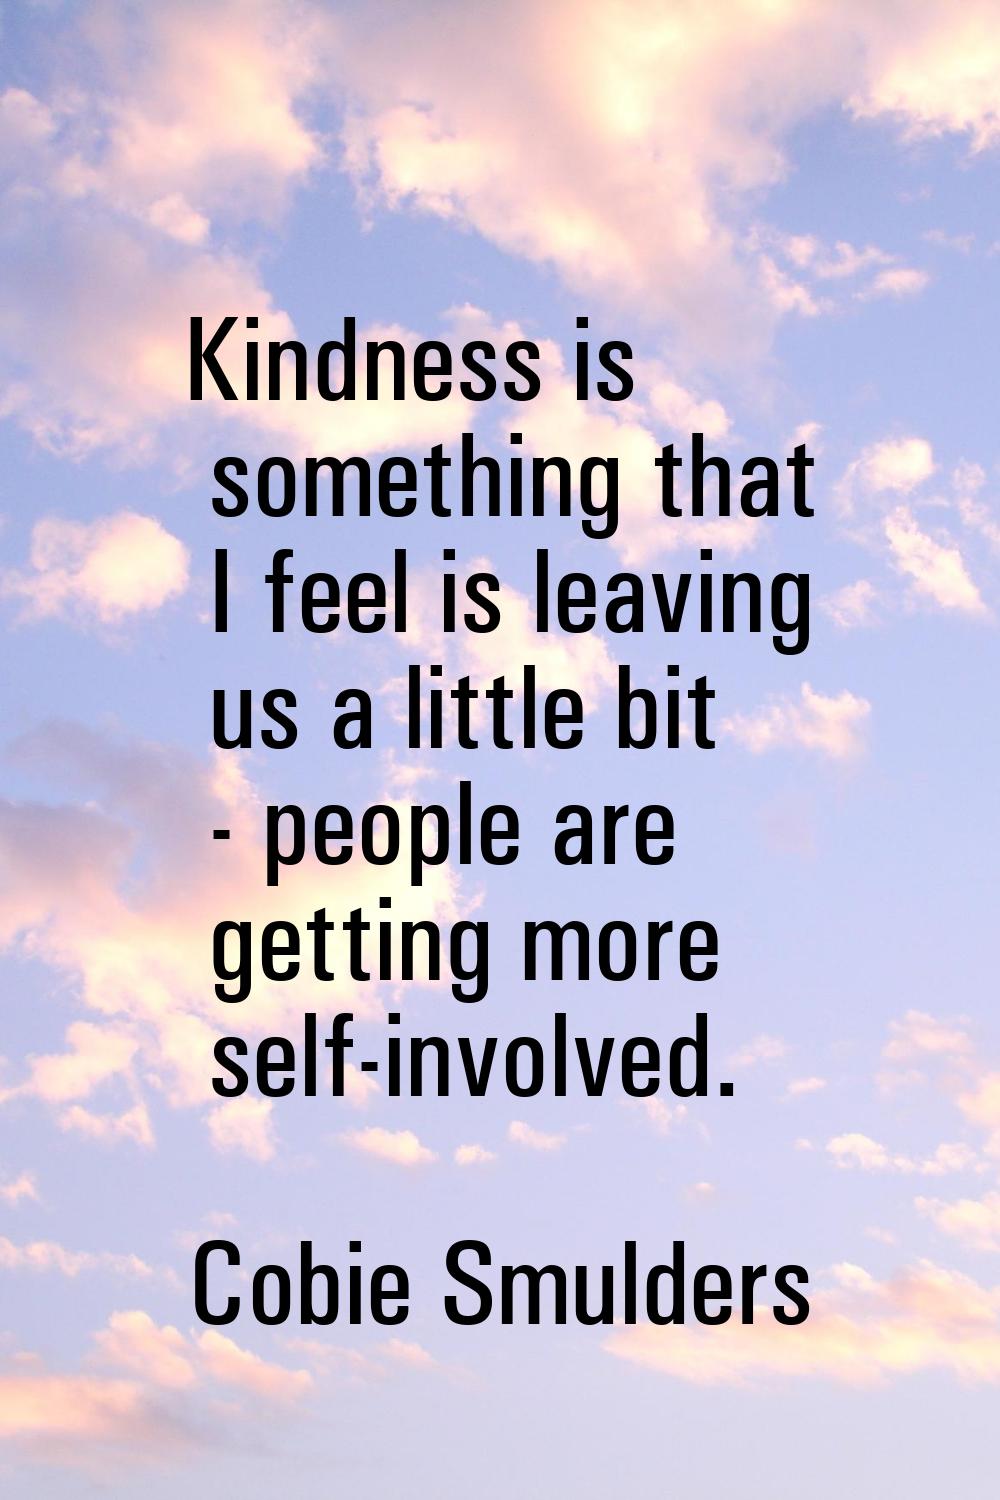 Kindness is something that I feel is leaving us a little bit - people are getting more self-involve